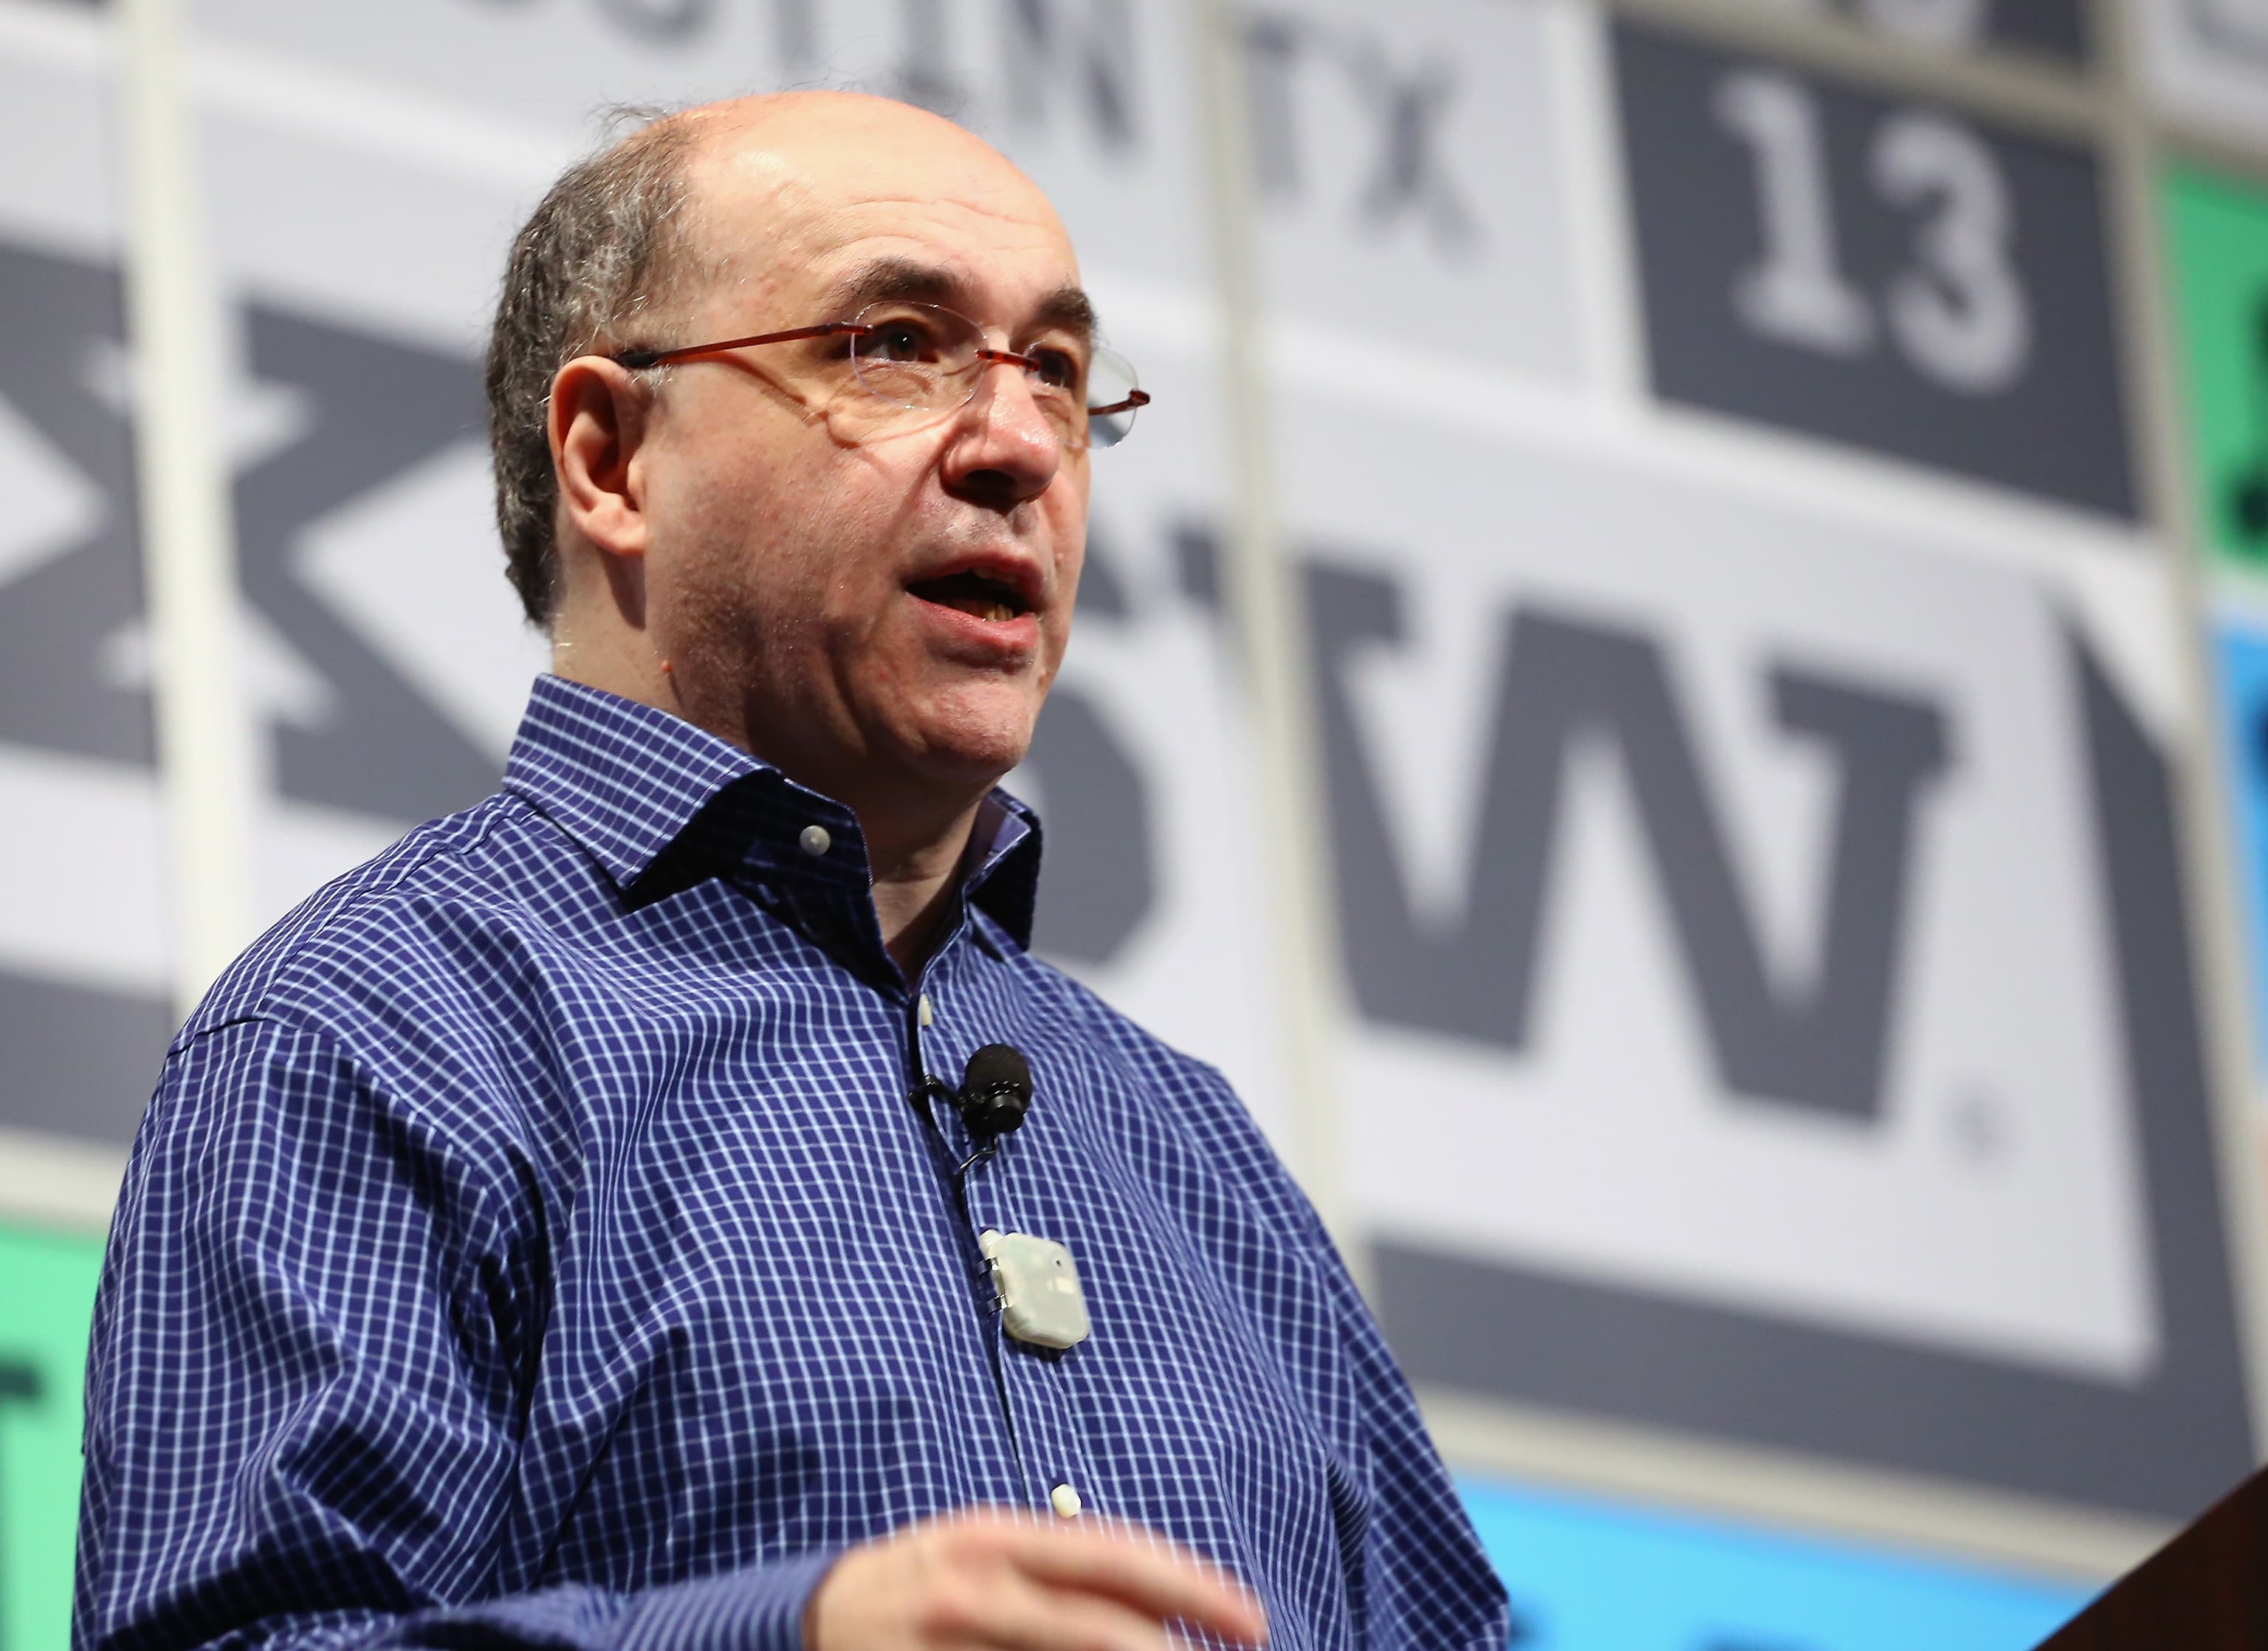 Stephen Wolfram: Why this brilliant physicist ditched his job3072 x 2236